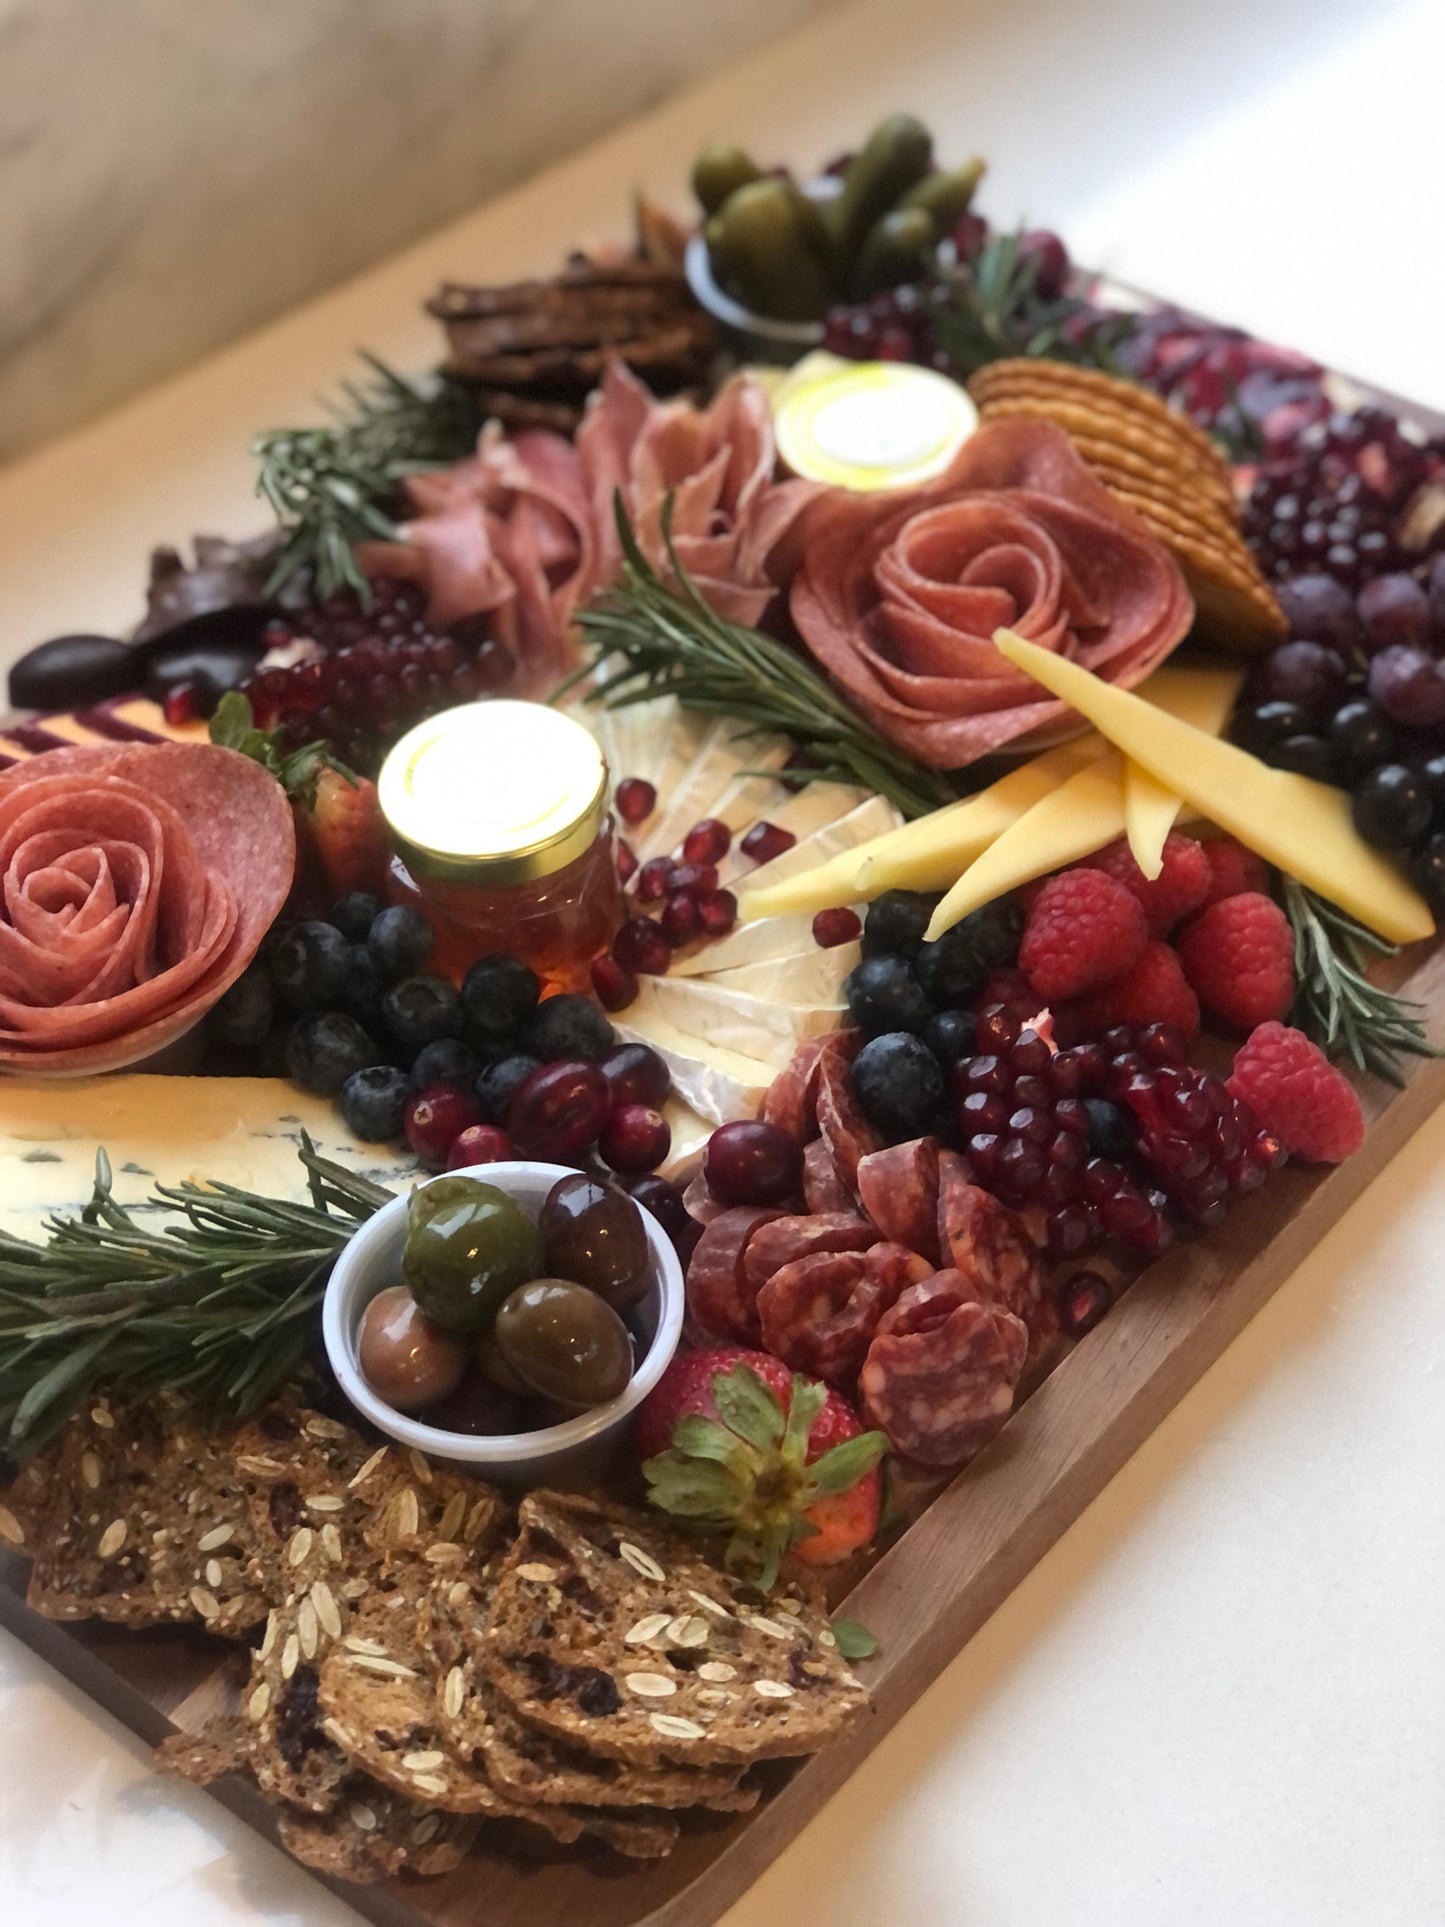 Seasonal Nibbles Charcuterie Board - Small Rectangle (17 x 12 inches)